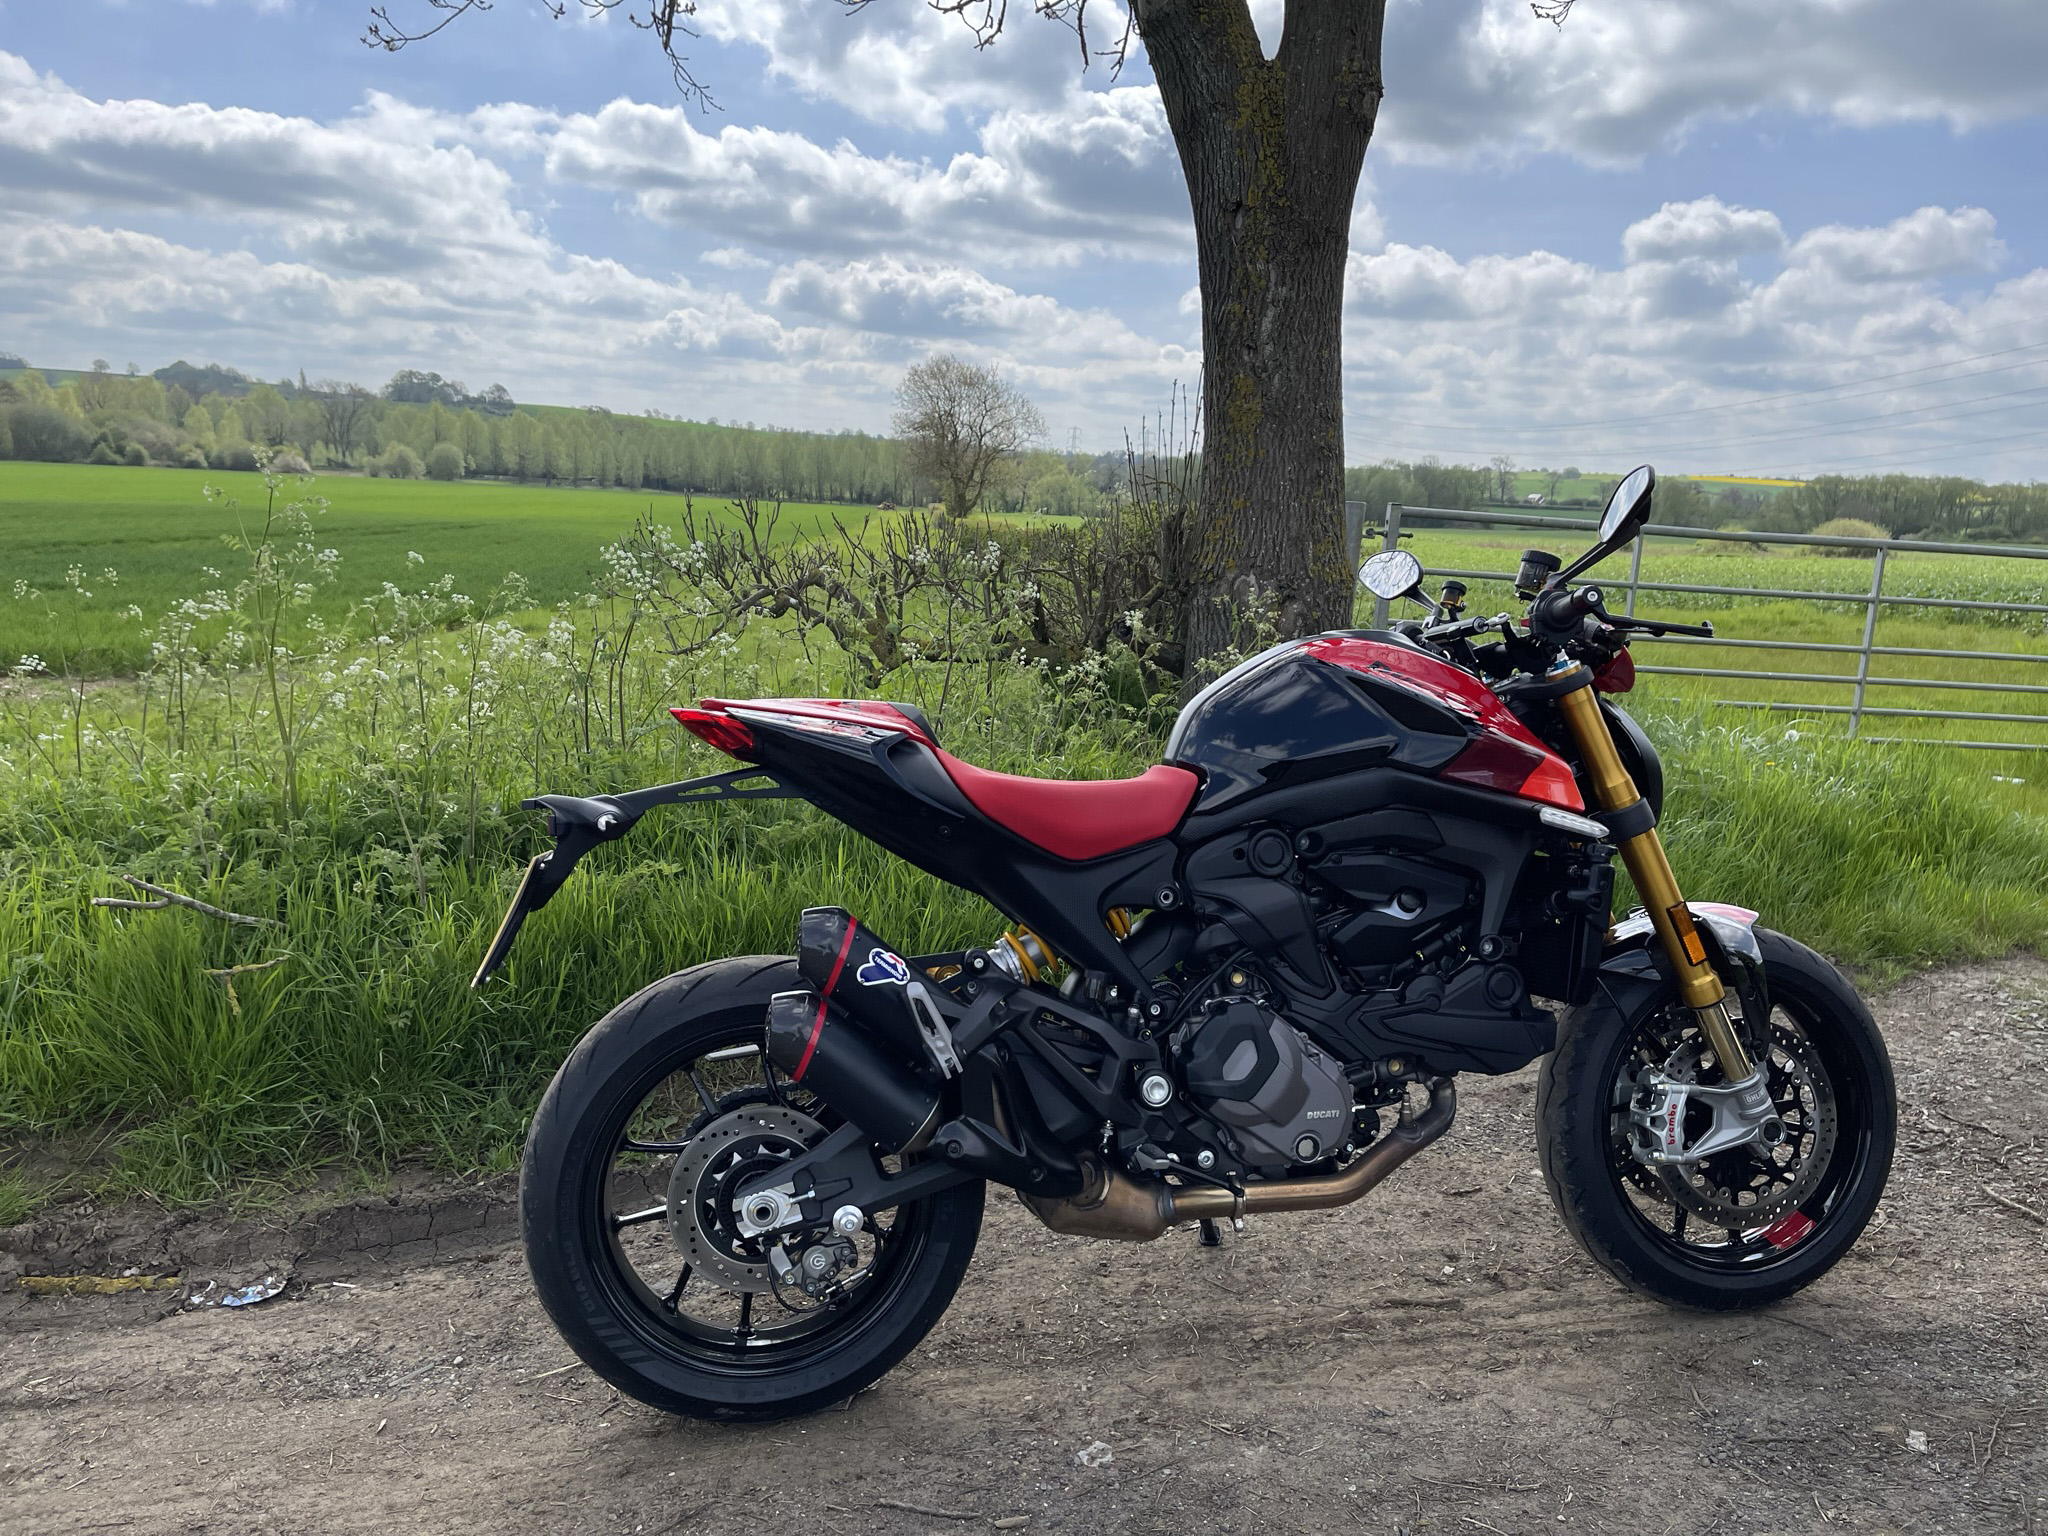 Monster in the UK countryside - Ducati Monster SP review